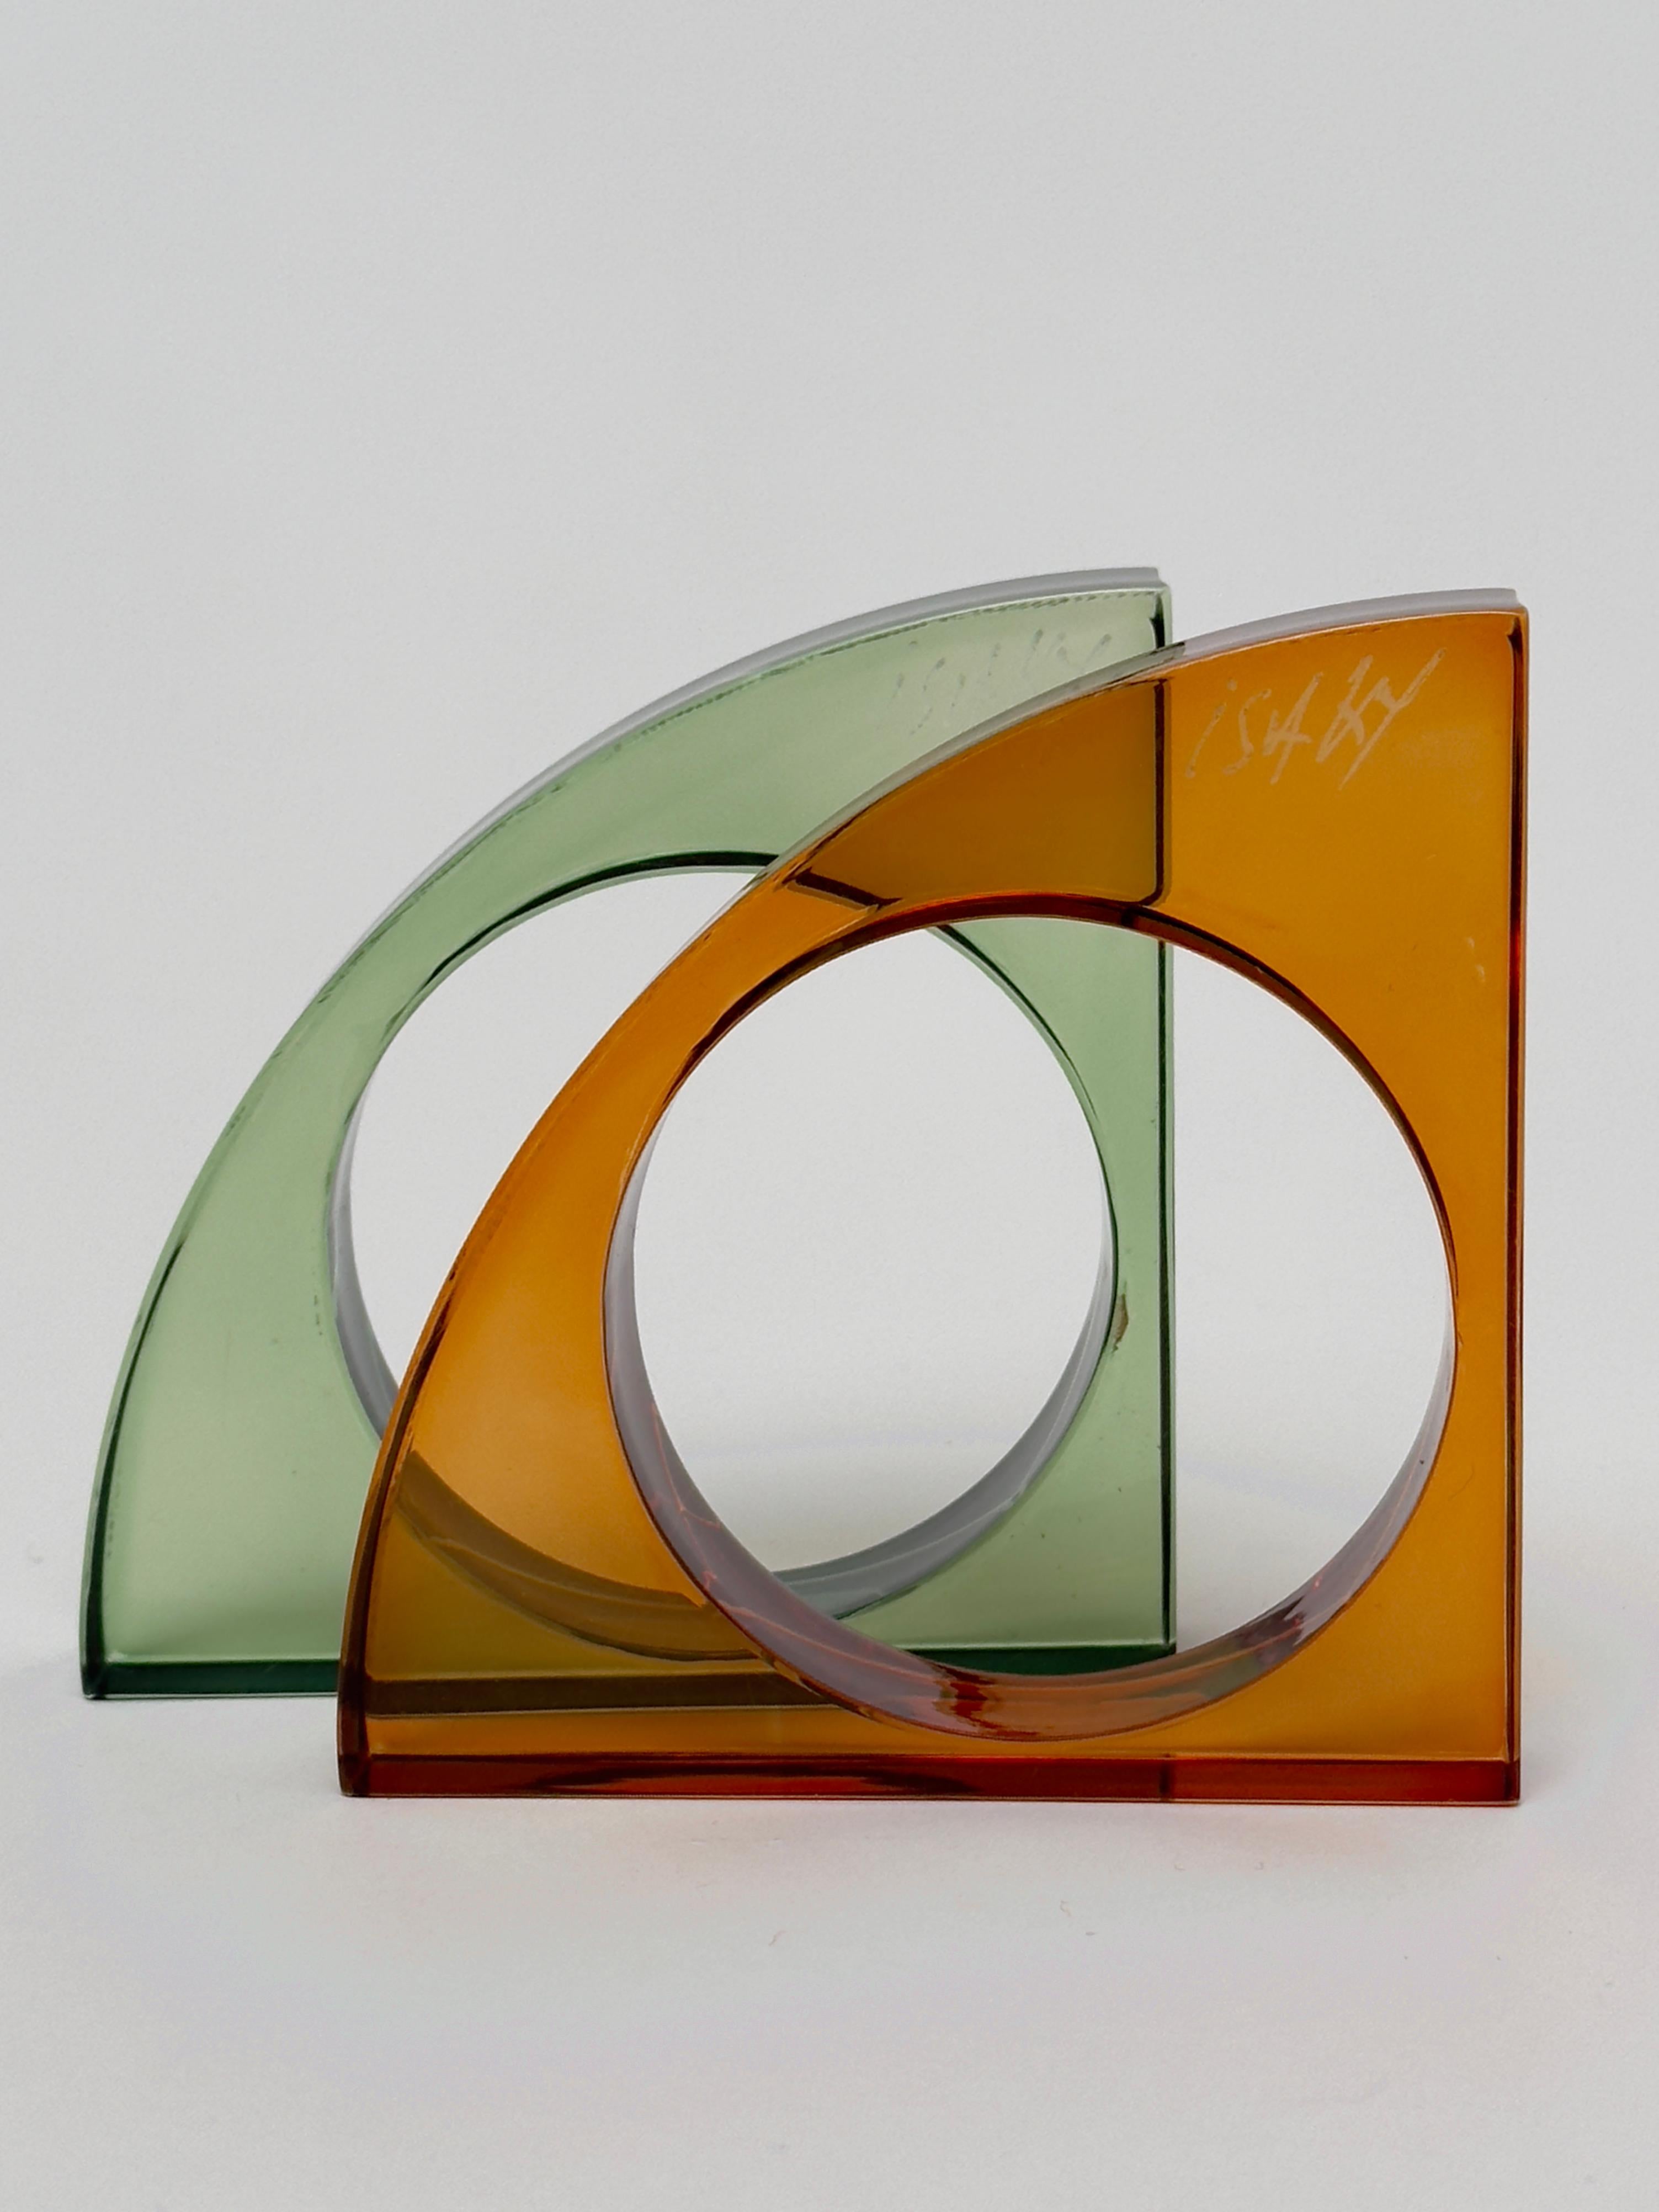 Large Plexiglass Cuff, Isaky, Paris c. 1980 In Good Condition For Sale In St Ouen, FR